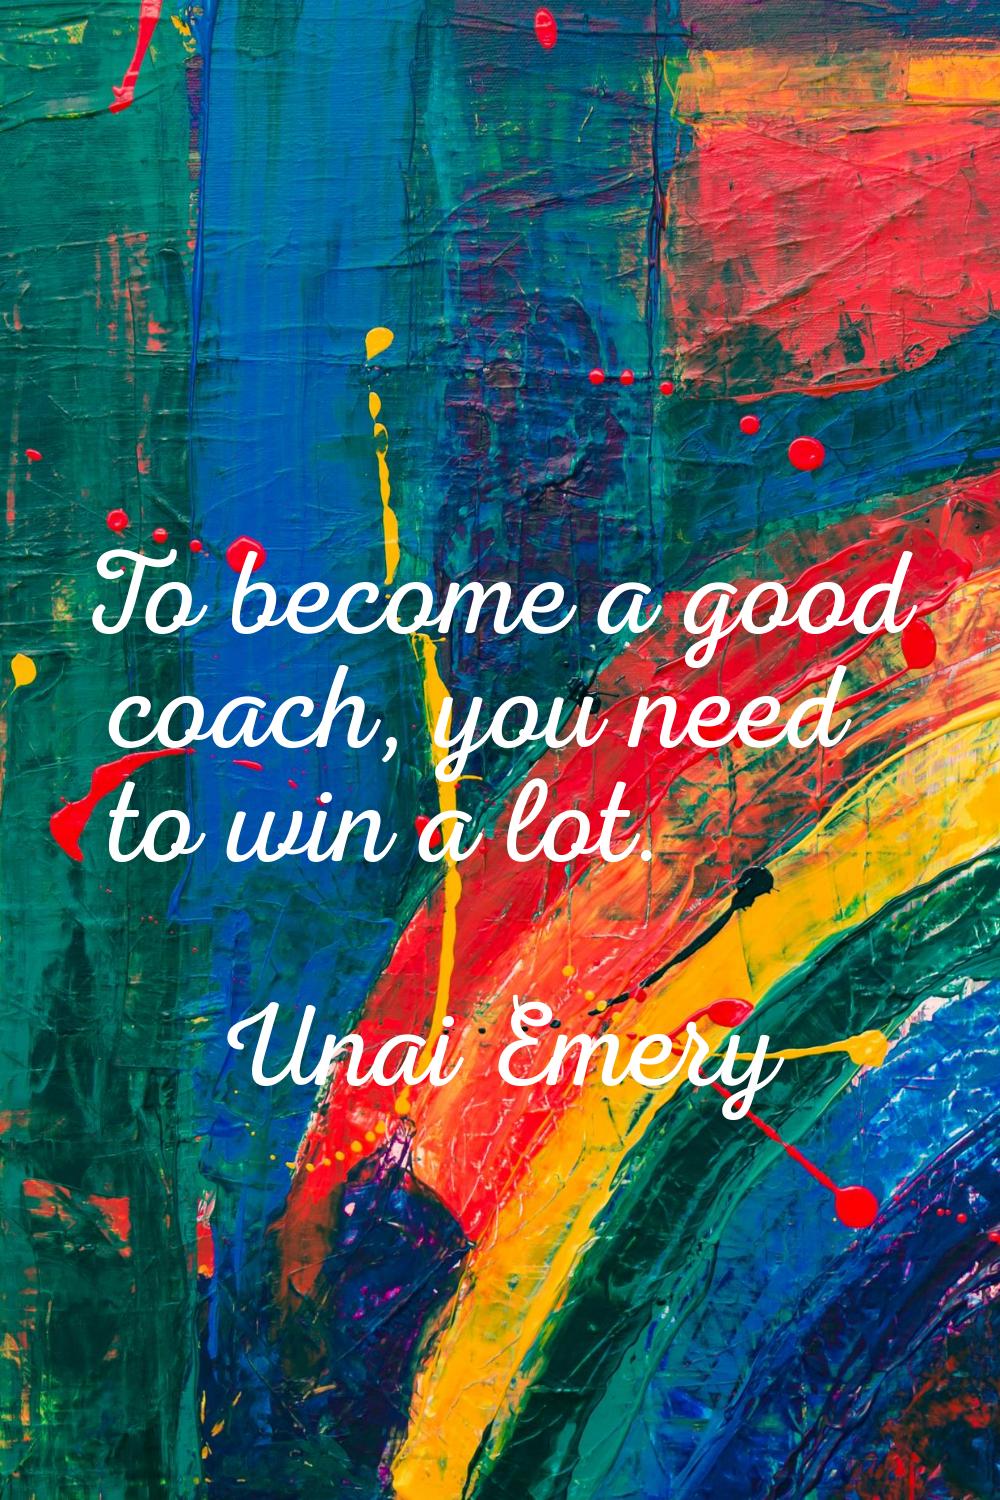 To become a good coach, you need to win a lot.